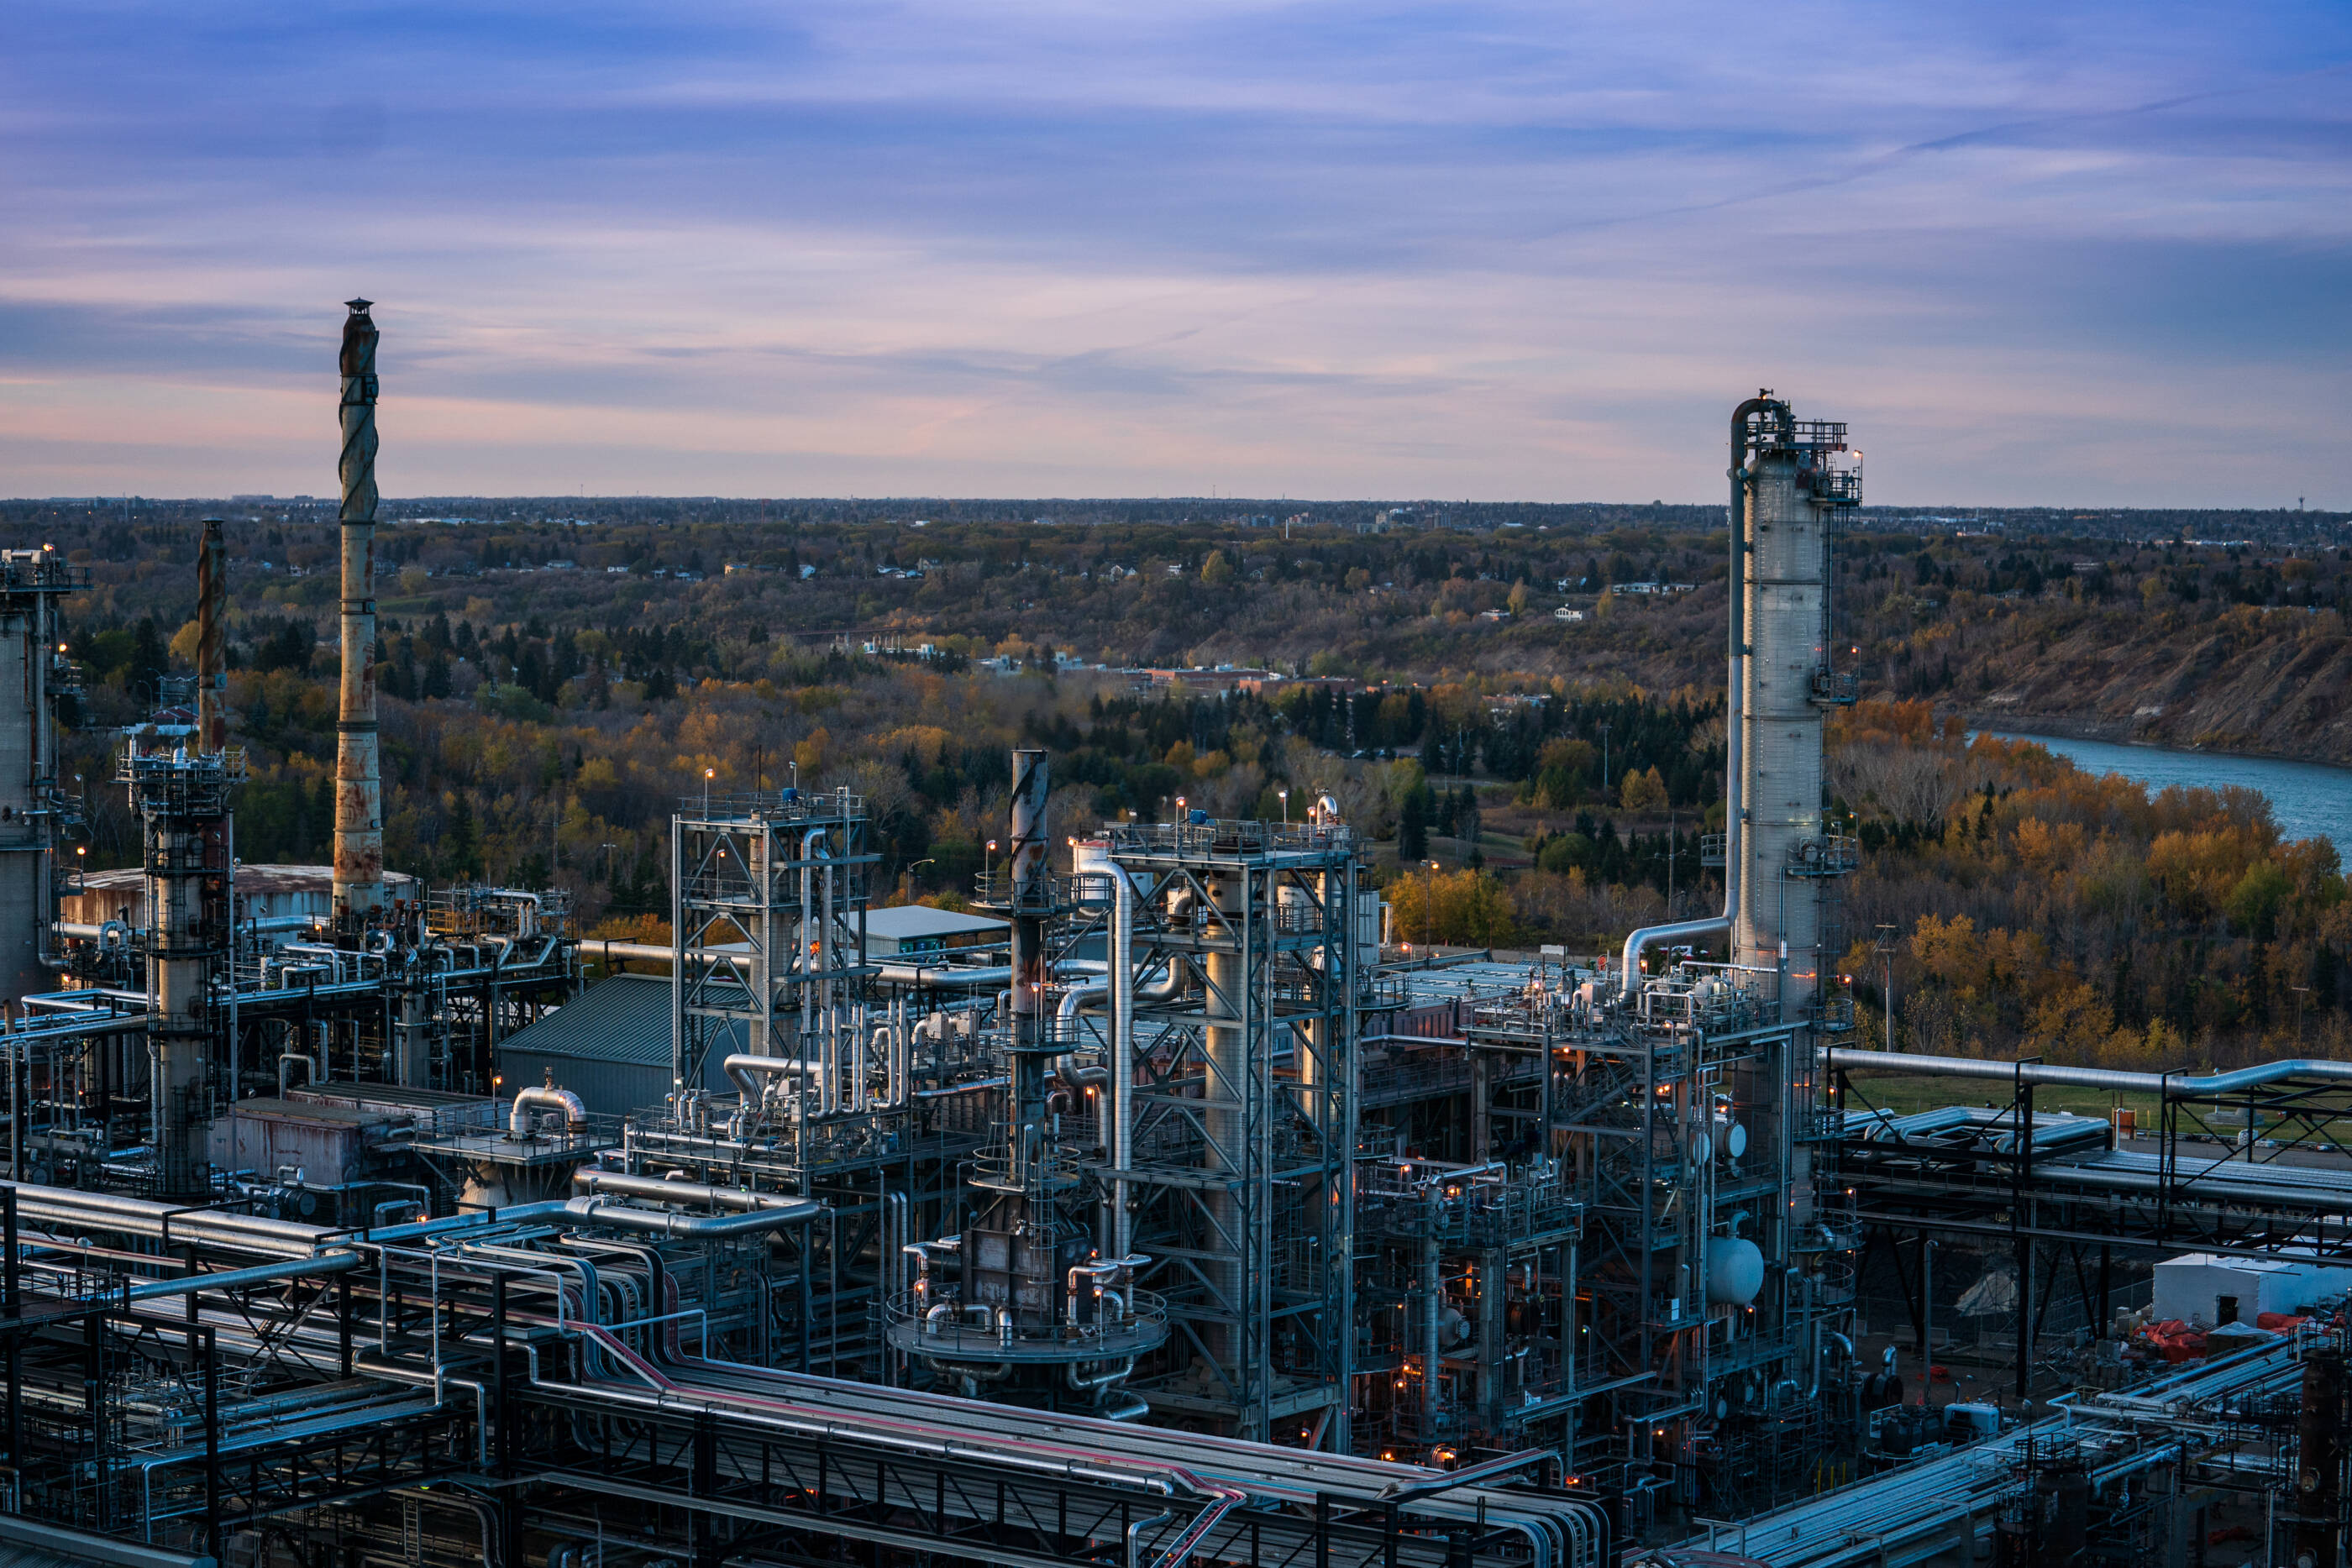 aerial view of Strathcona refinery